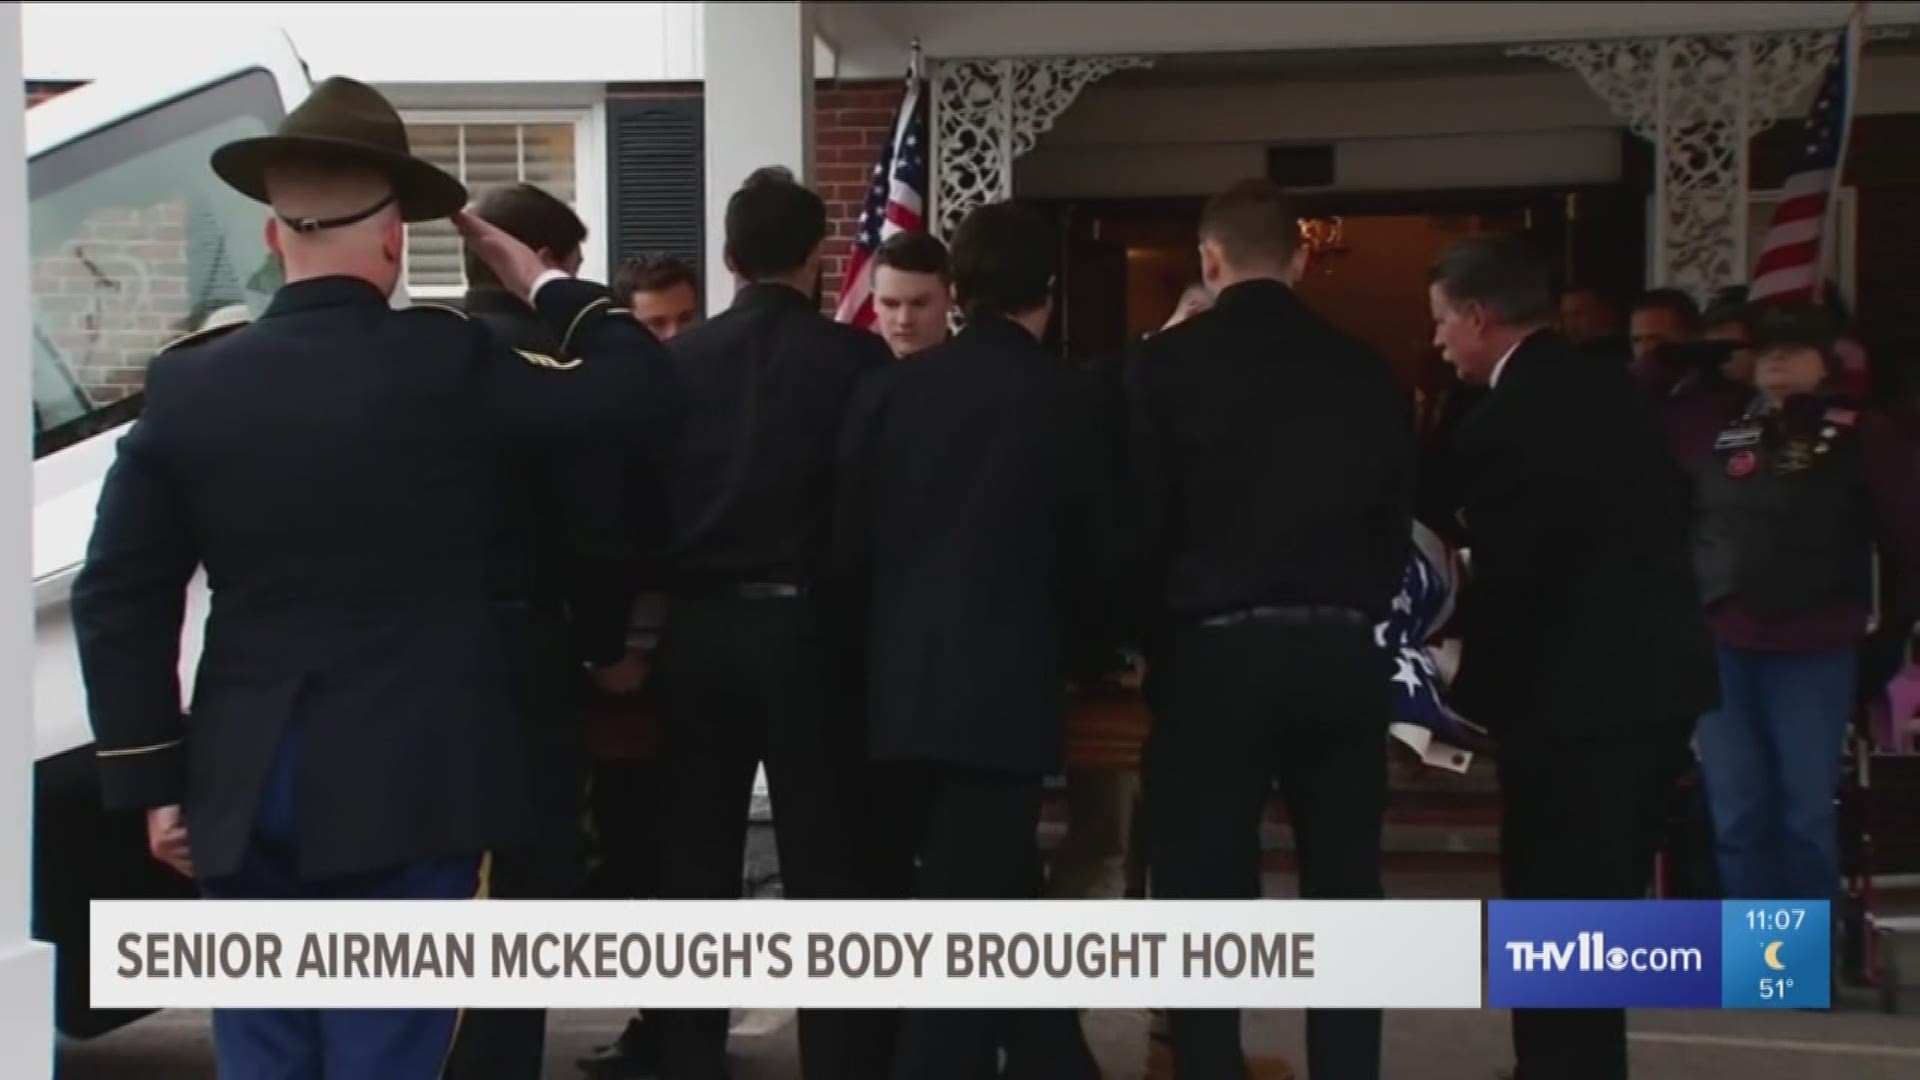 Today, the body of senior airman Shawn Mckeough, shot and killed in North Little Rock last Friday, was brought back to Westbrook, Maine.